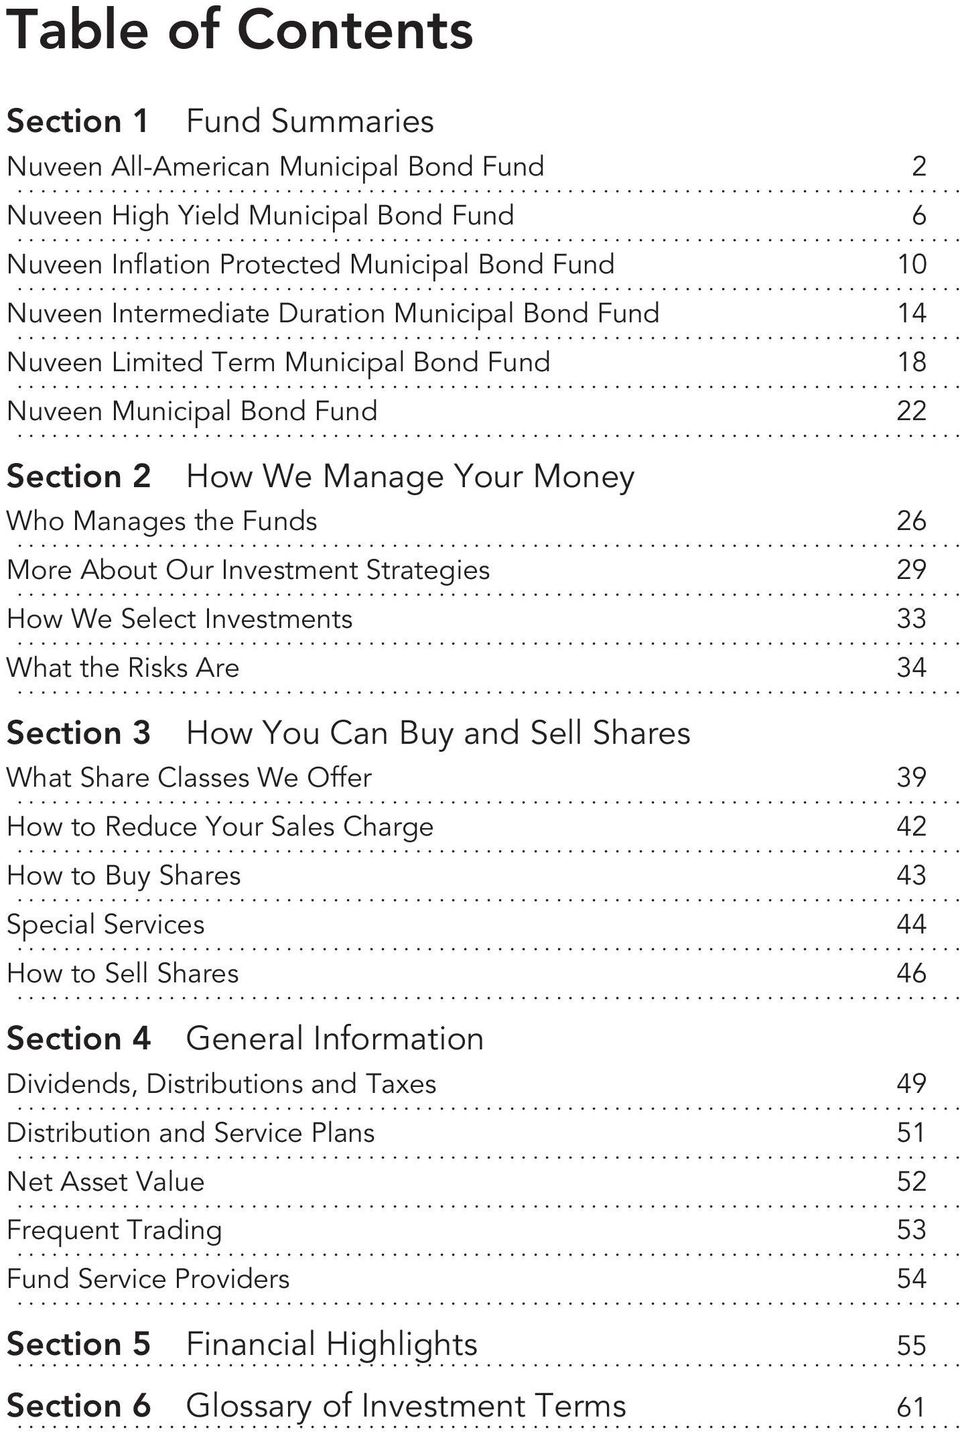 .. More About Our Investment Strategies 29... How We Select Investments 33... What the Risks Are 34... Section 3 How You Can Buy and Sell Shares What Share Classes We Offer 39.